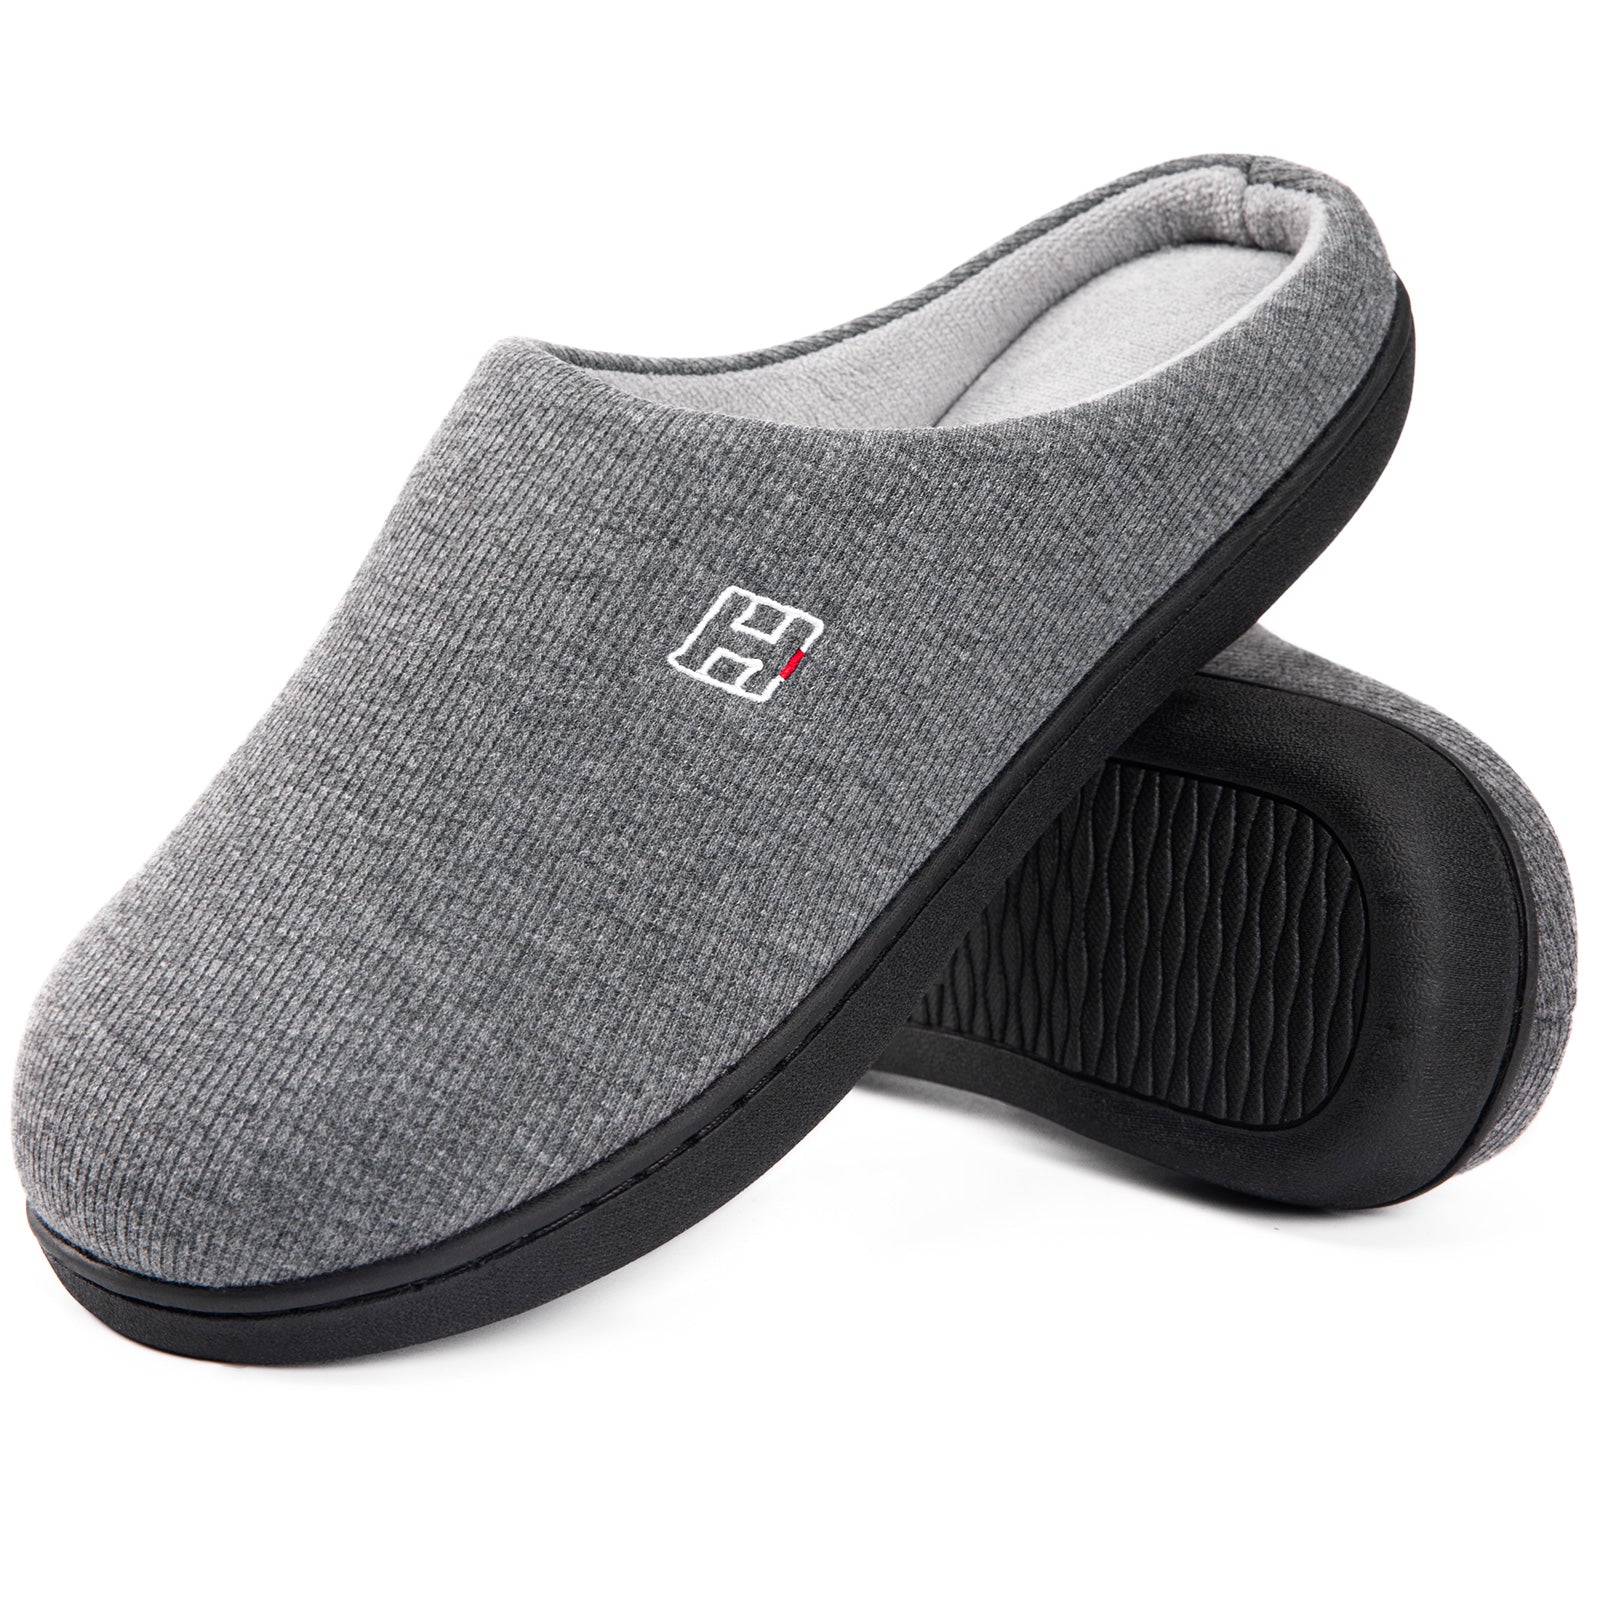 Unisex Classic Plush Lined Bedroom House Slippers